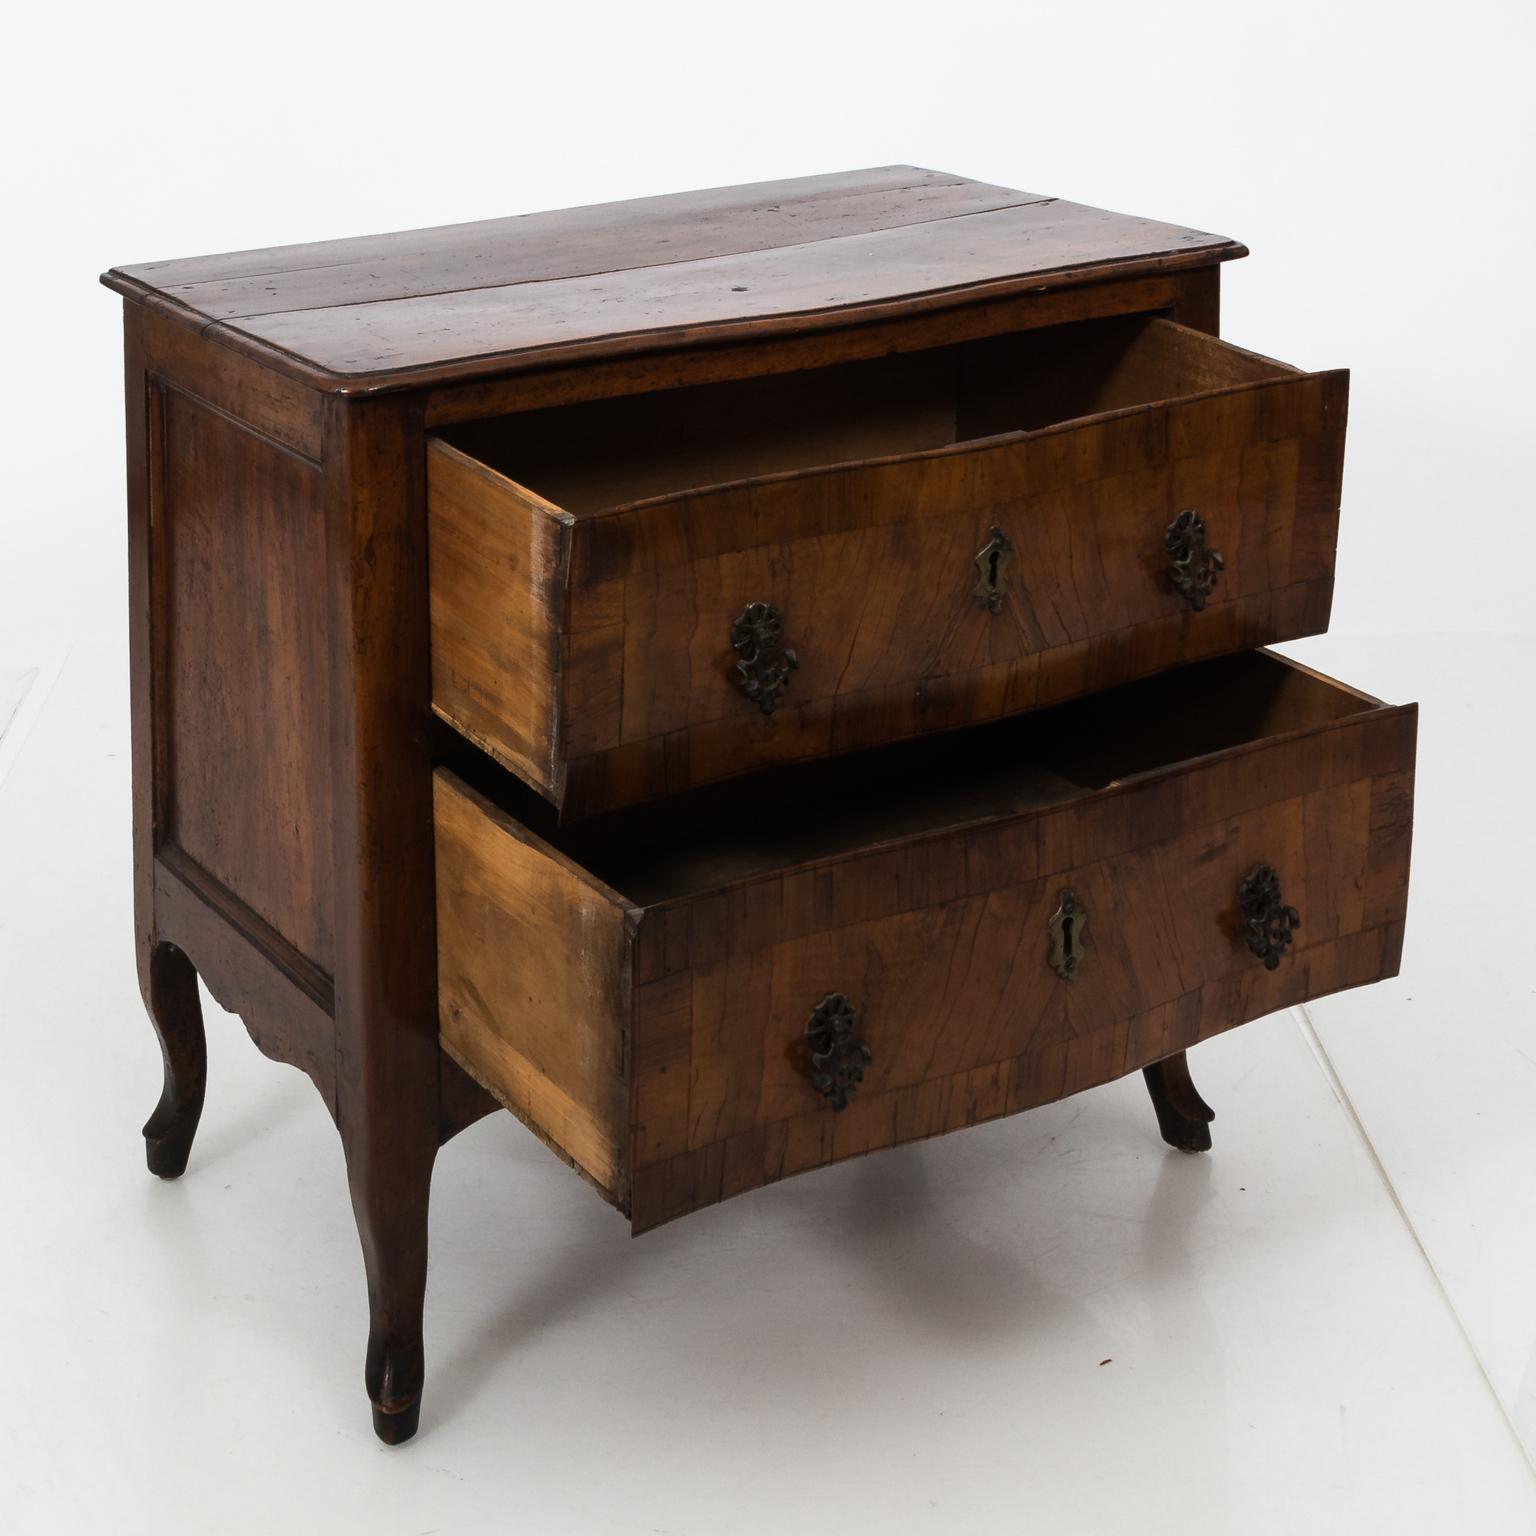 Italian two-drawer chest with metal hardware and cabriole legs, circa 18th century. The wood on the tabletop also features some wear with age and minor contraction in the wood at the center causing a gap.